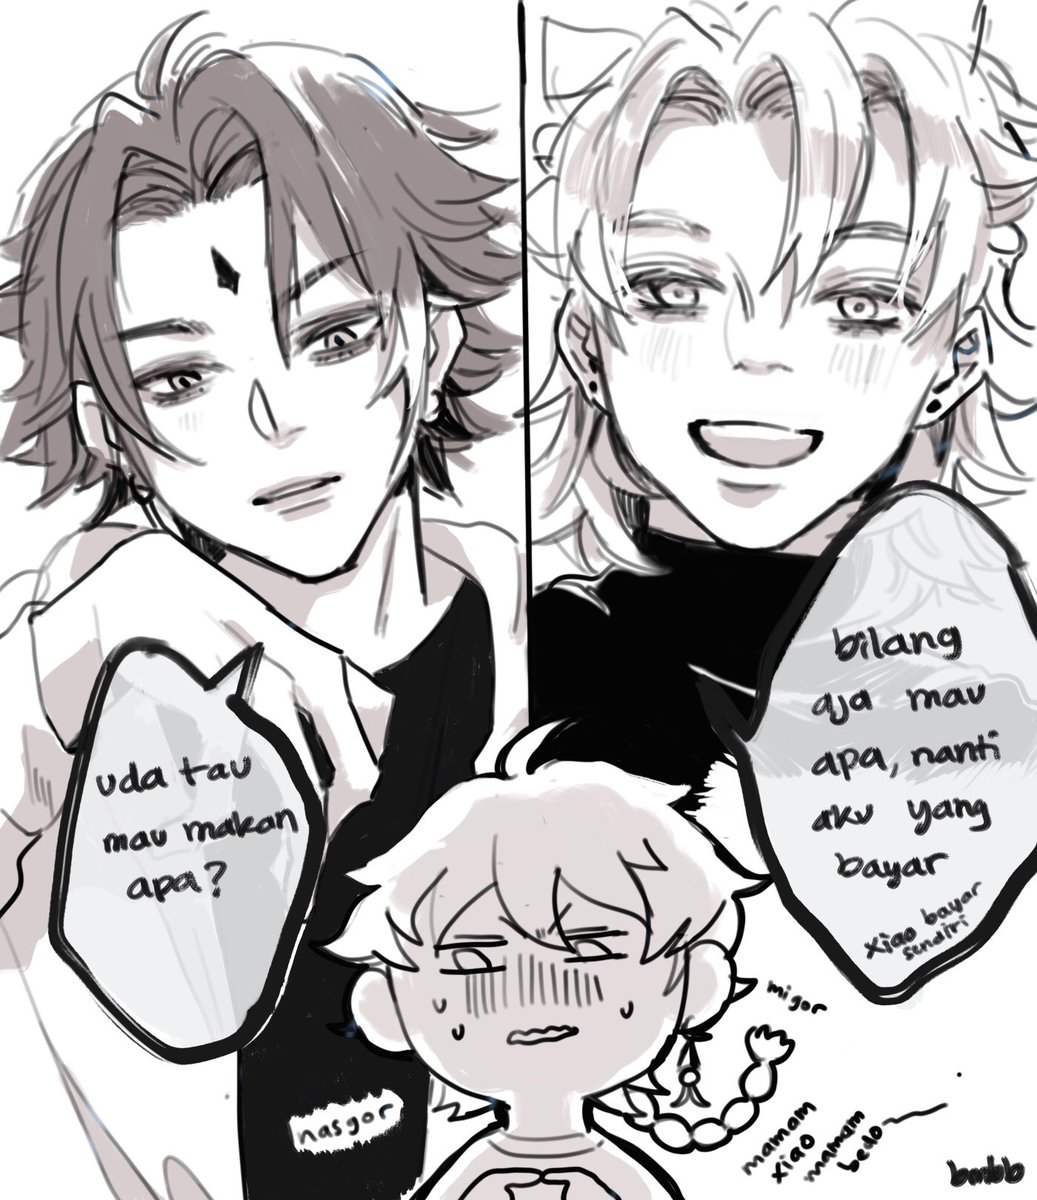 Back at it again with my albetxiao bs 

? : have you decided what you want to eat, Aether?
? : just tell me what you wanna eat, I will treat you (but xiao should pay for himself) 
? : omg... idk?? Fried rice...? Yakisoba? .............eat both of.....you?? 